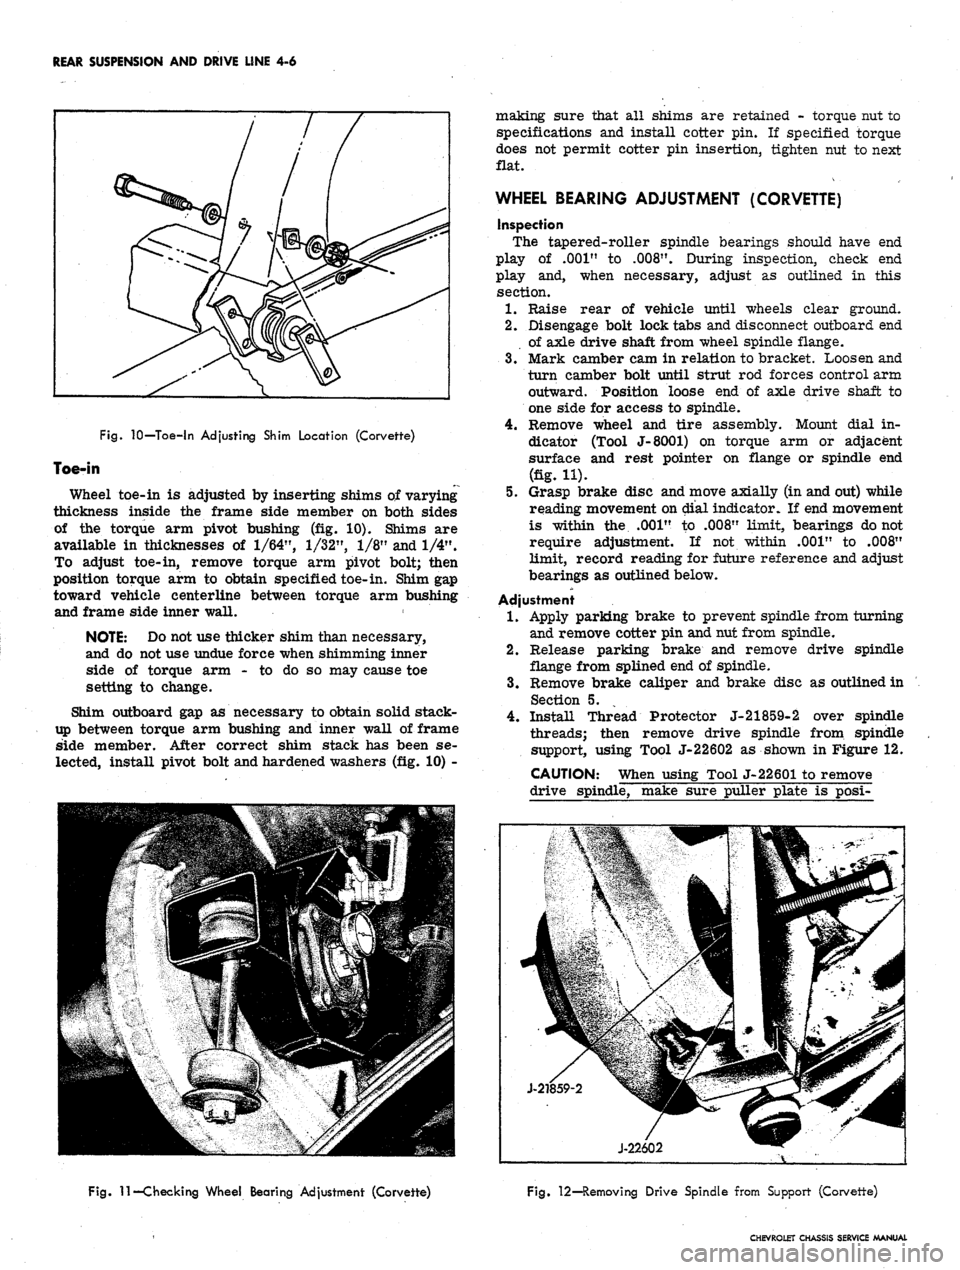 CHEVROLET CAMARO 1967 1.G Chassis Owners Guide 
REAR SUSPENSION AND DRIVE LINE 4-6

Fig.
 10—Toe-in Adjusting Shim Location (Corvette)

Toe-in

Wheel toe-in is adjusted by inserting shims of varying

thickness inside the frame side member on bot